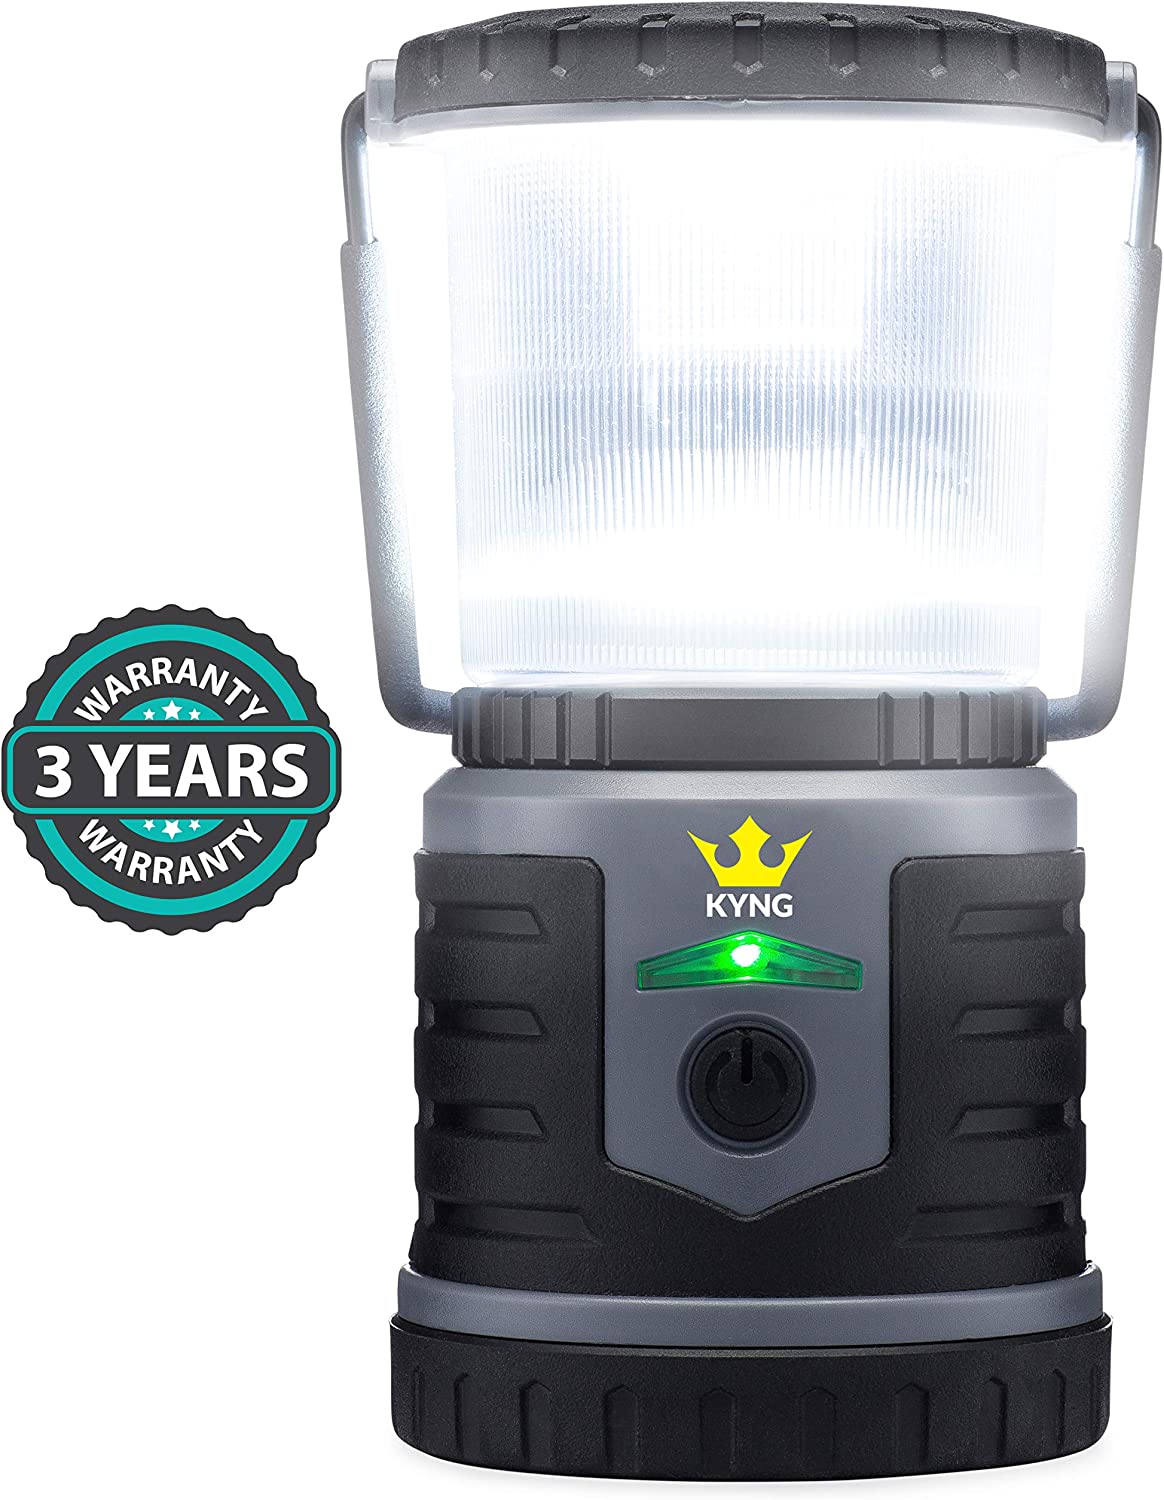 KYNG Rechargeable LED Lantern Brightest Light for Camping, Emergency Use, Outdoors, and Home- Lasts for 250 Hours on a Single Charge- Includes USB Cord and Wall Plug, Built in Phone Charger